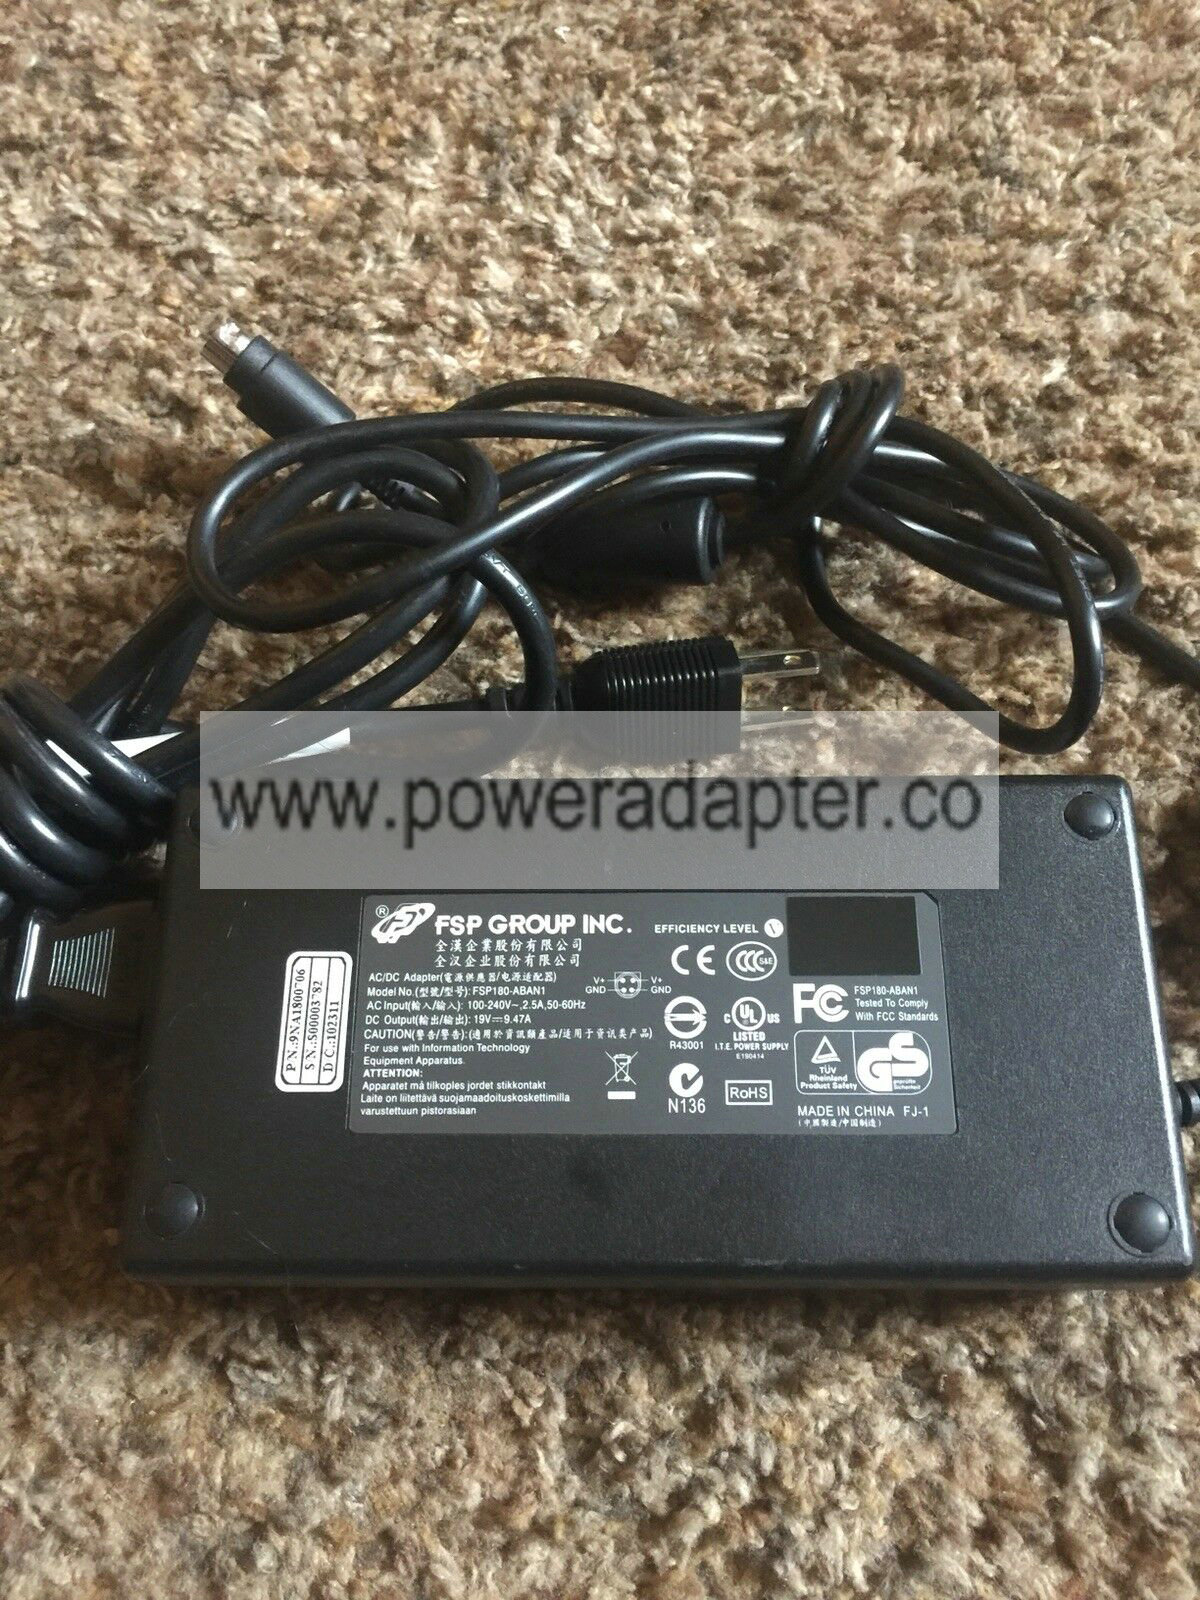 AC/DC Adapter For FSP GROUP INC. FSP180-ABAN1 19v 9.47A 4pin Brand: FPS GROUP INC. Type: AC & DC 19v 9.47A 4pin - Click Image to Close